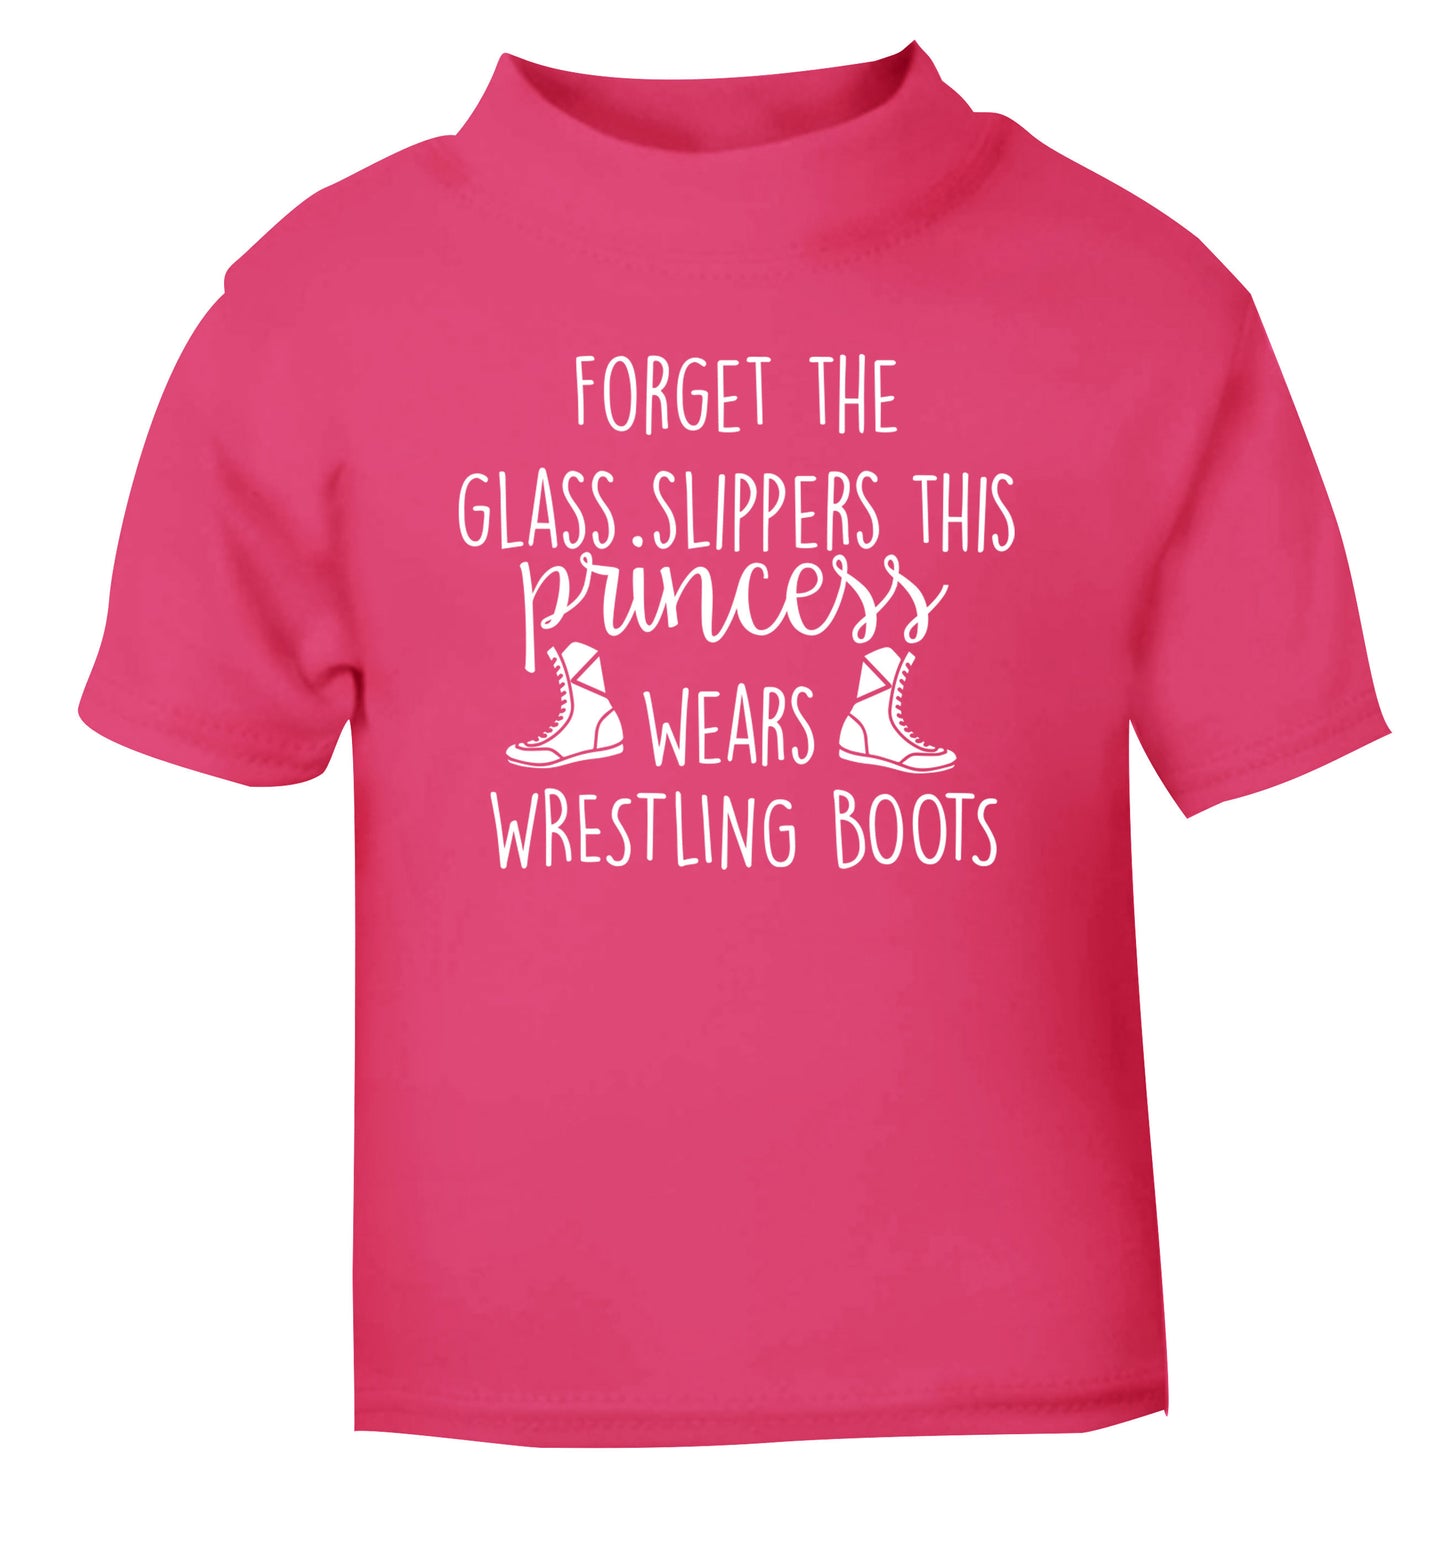 Forget the glass slippers this princess wears wrestling boots pink Baby Toddler Tshirt 2 Years